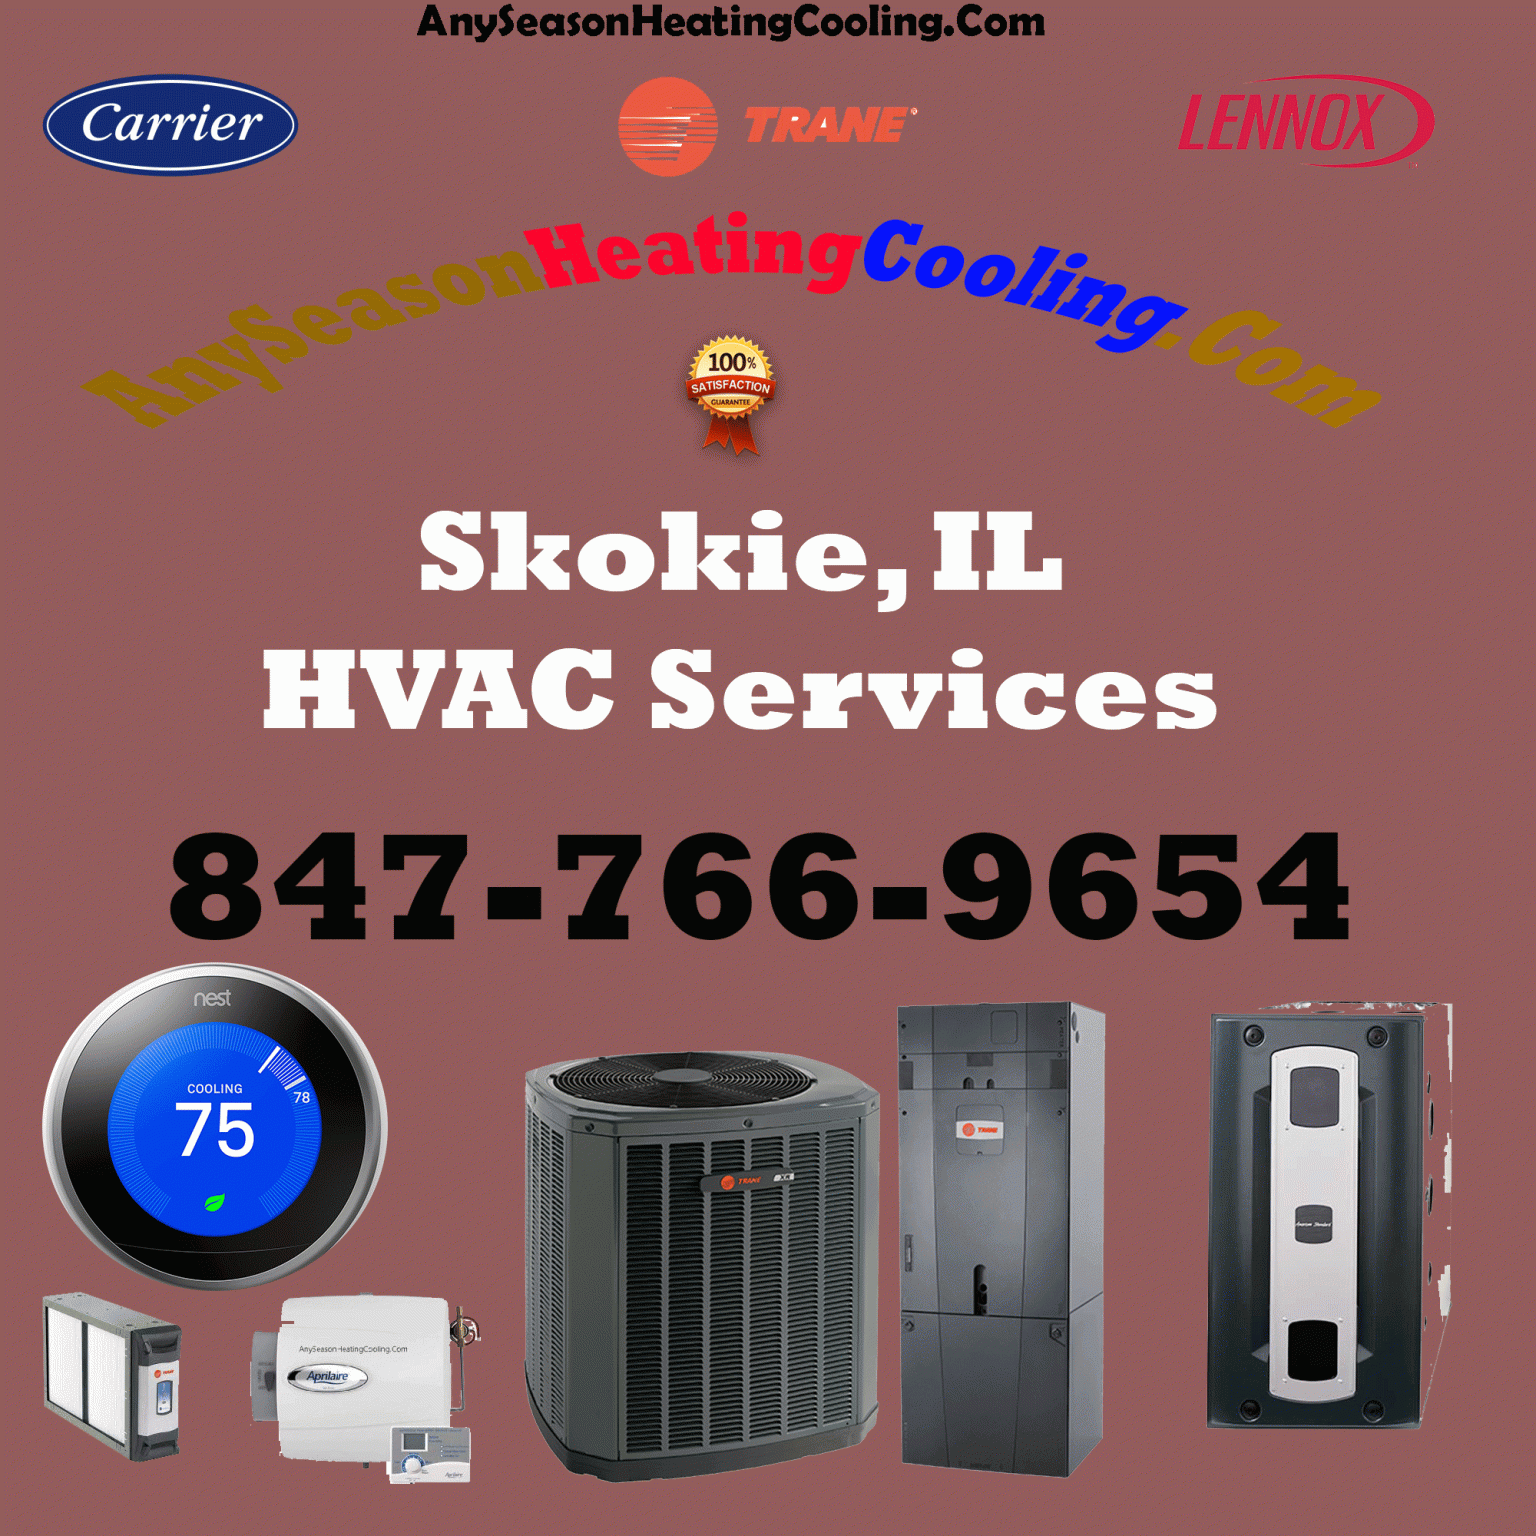 Skokie, IL Furnace Replacement for Less